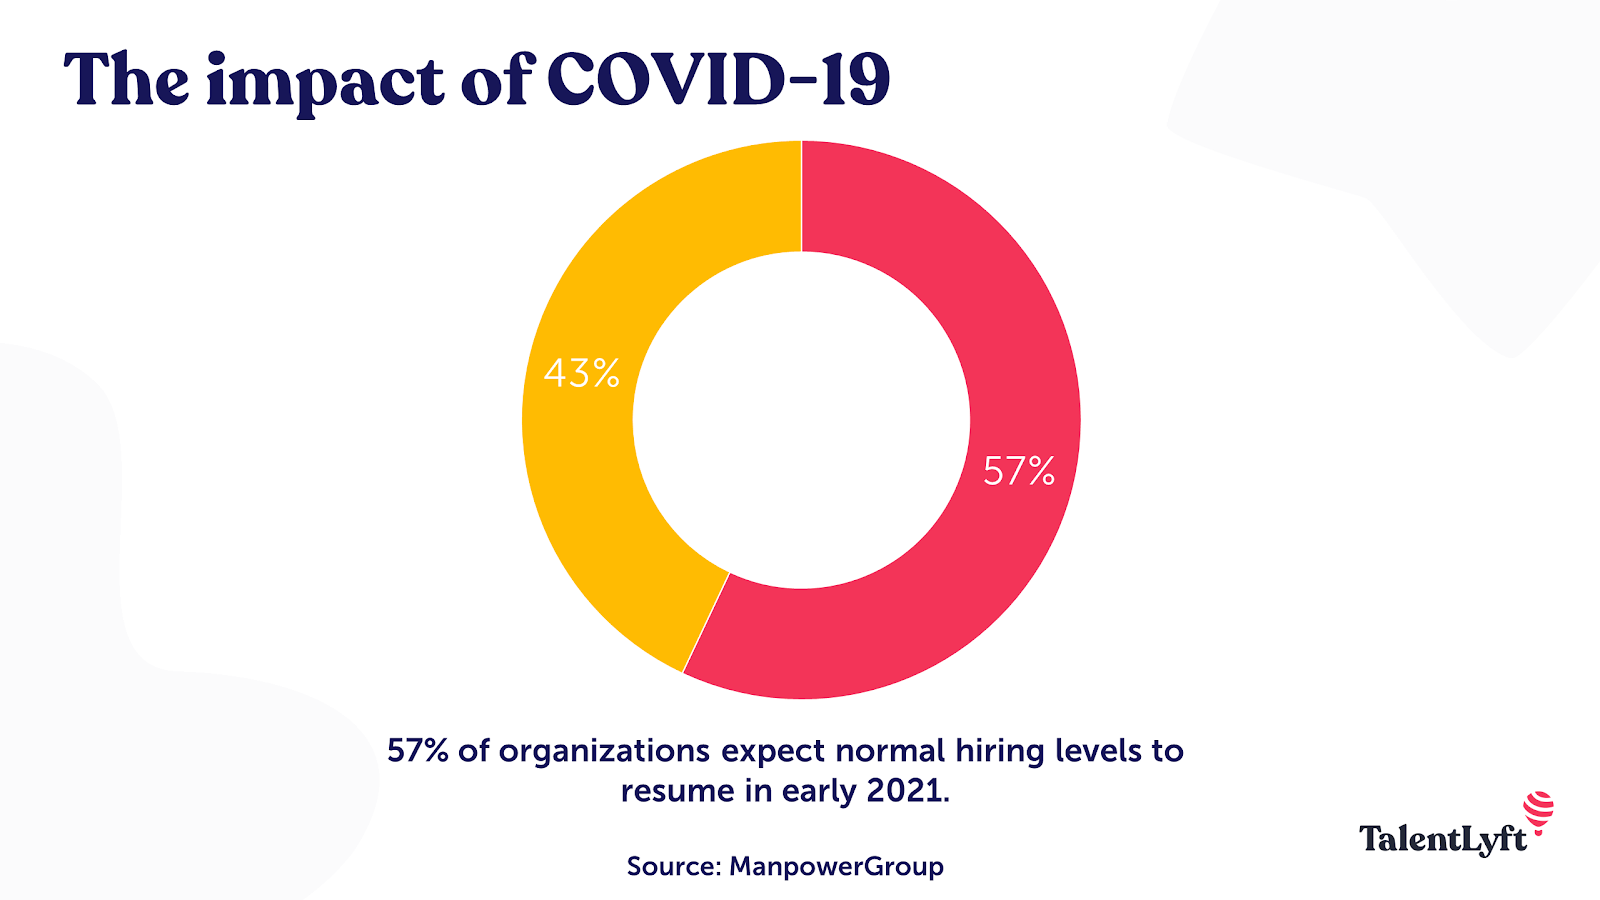 The impact of COVID-19 on recruitment